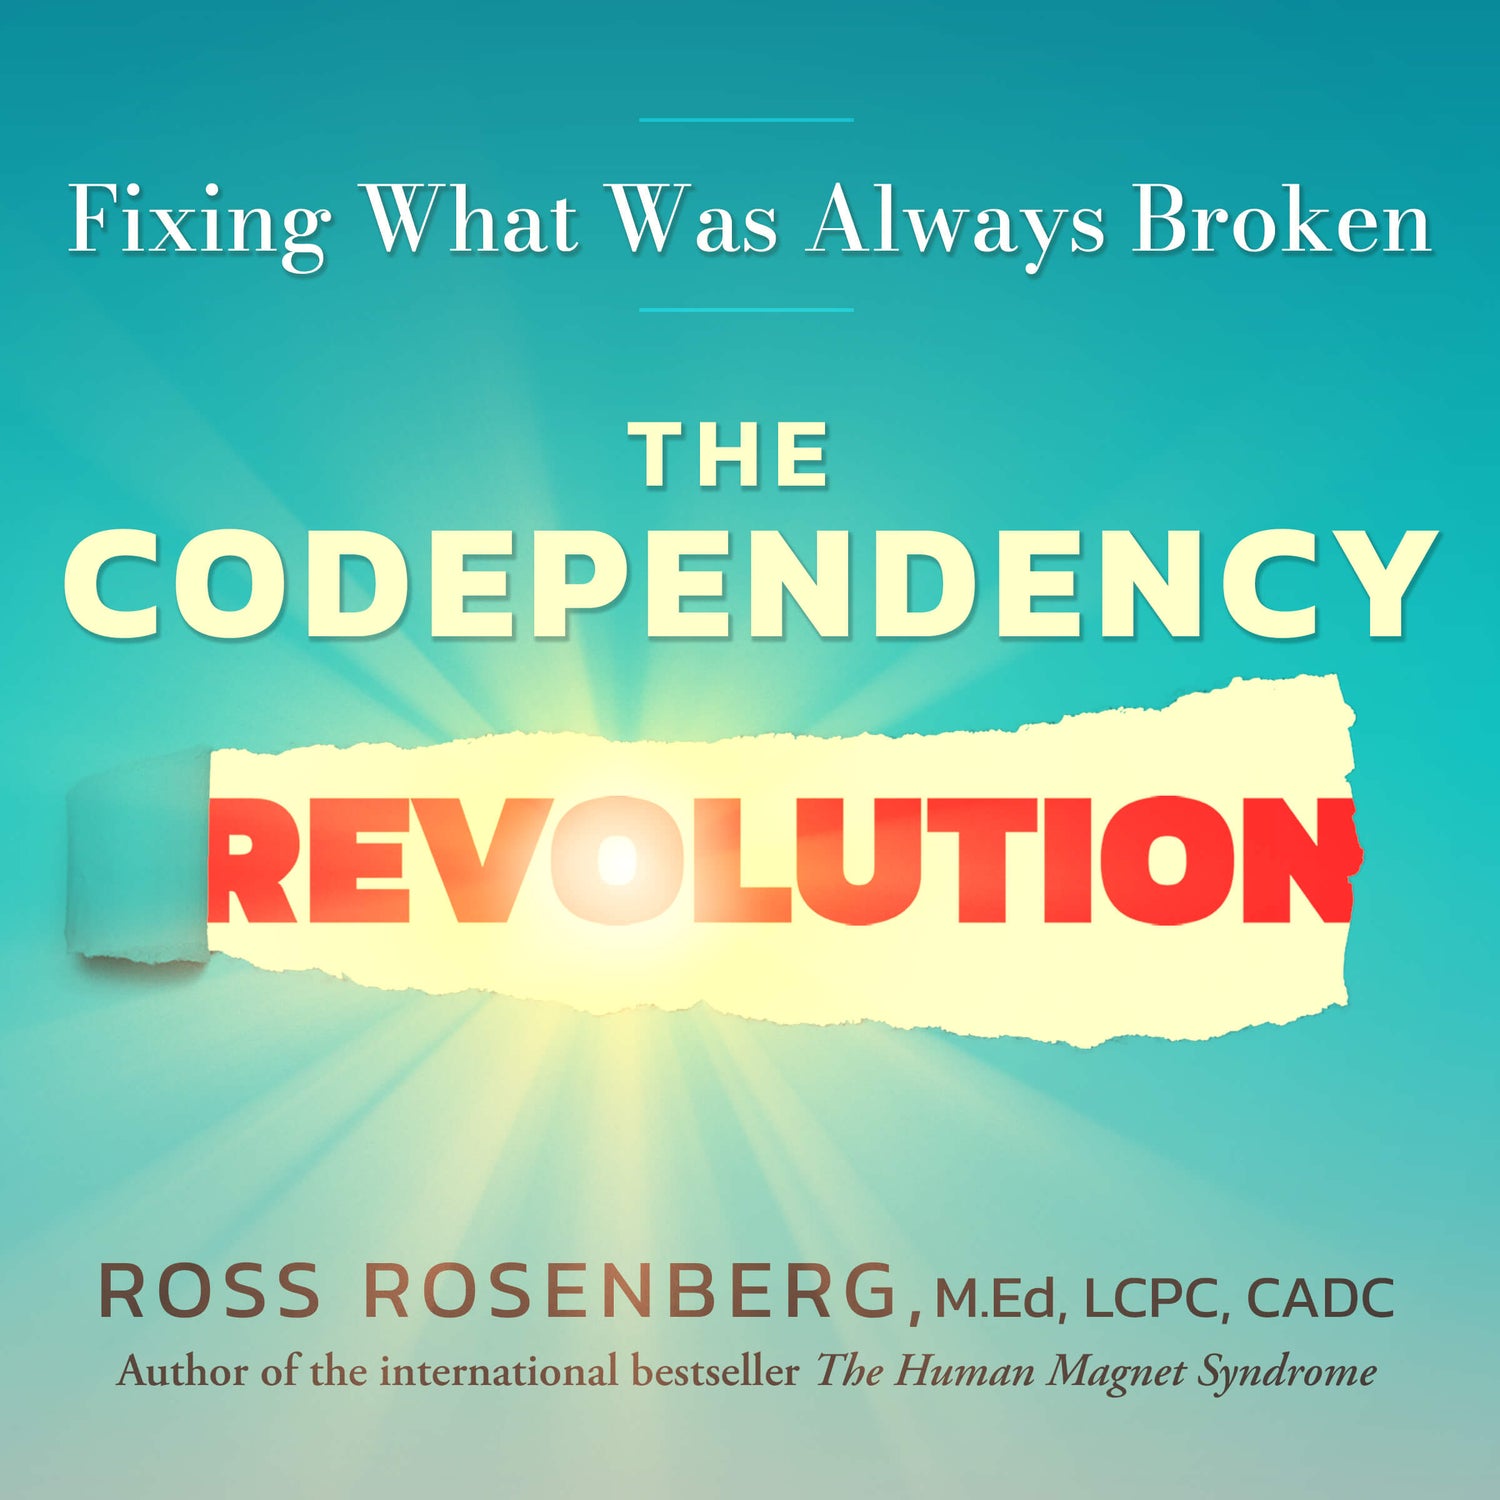 The Codependency Revolution